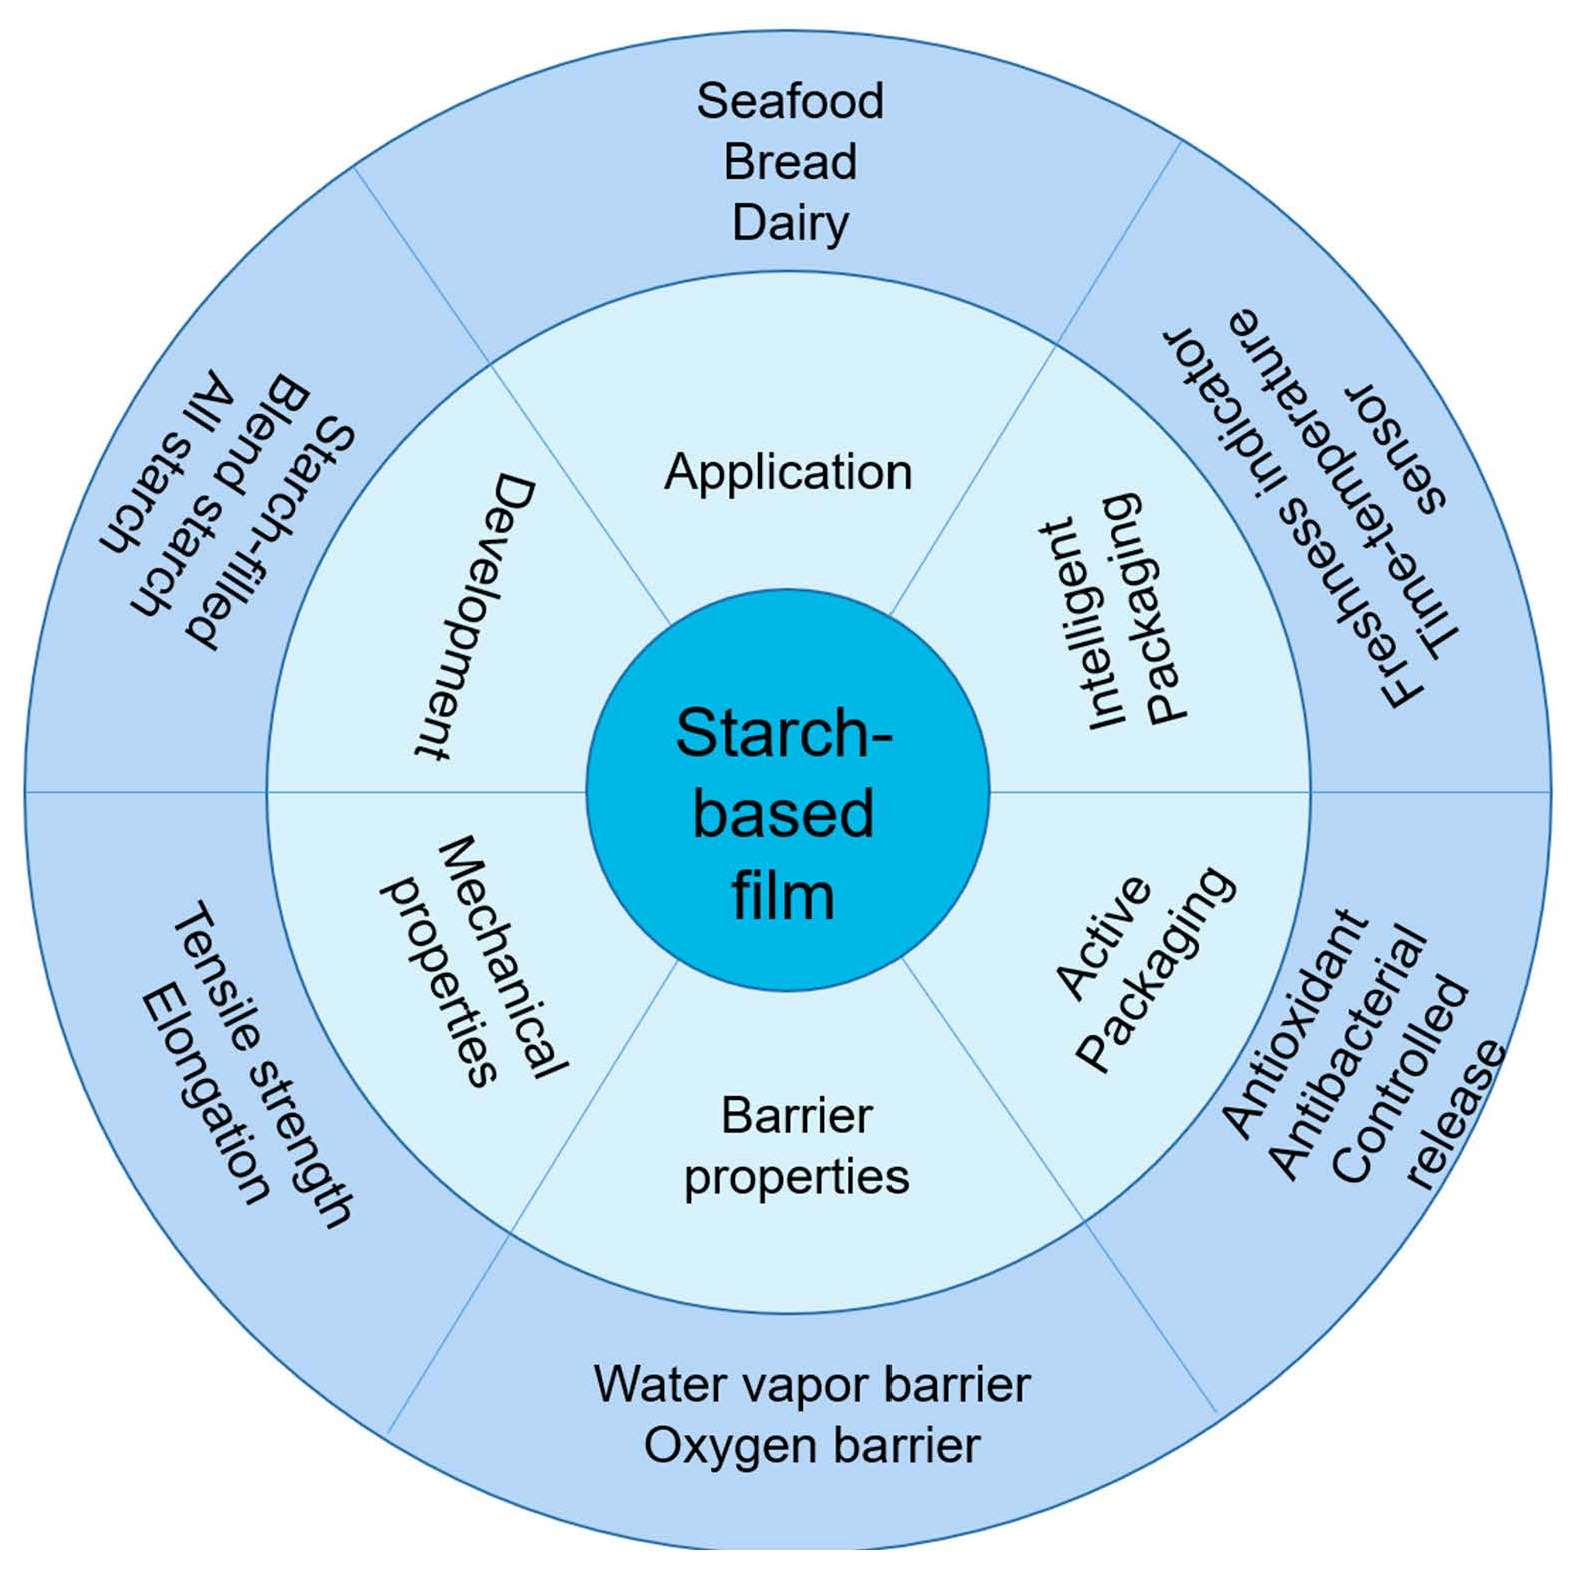 Physiological effects of resistant starch and its applications in food: a  review, Food Production, Processing and Nutrition